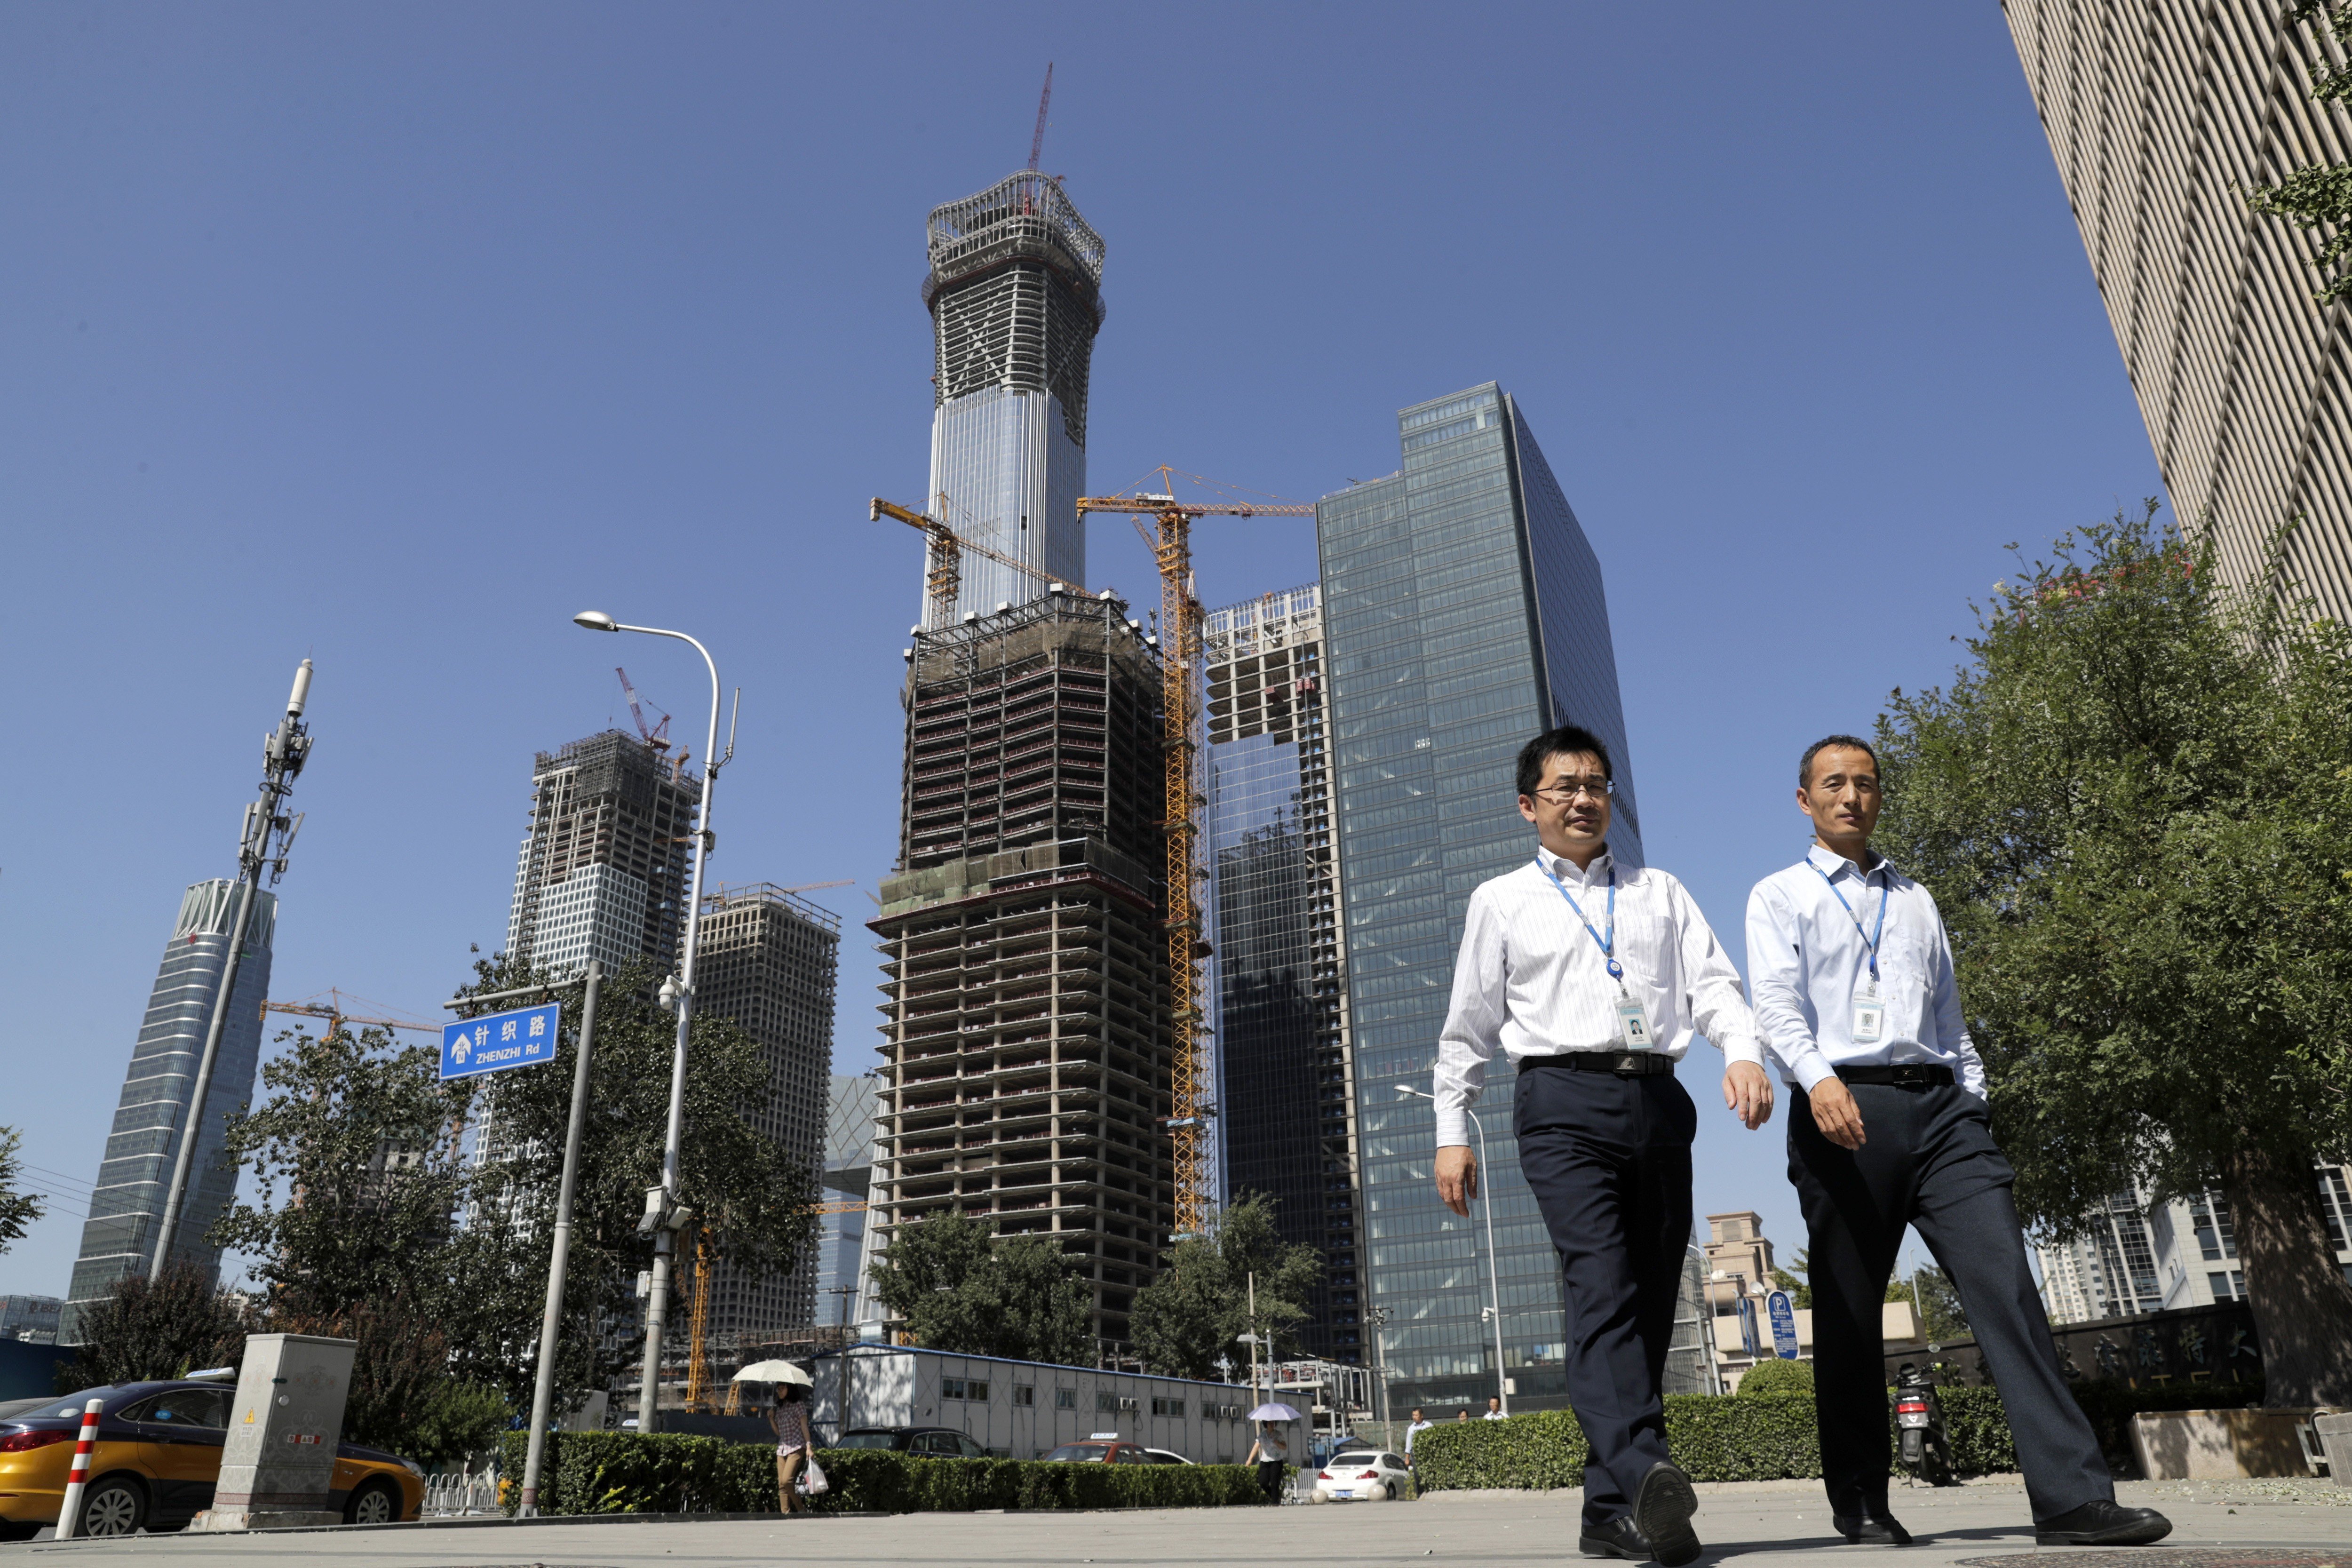 Chinese people walk by a construction site at the Central Business District in Beijing. By downplaying hard economic targets, future growth will slow down but be more balanced and sustainable. Photo: AP